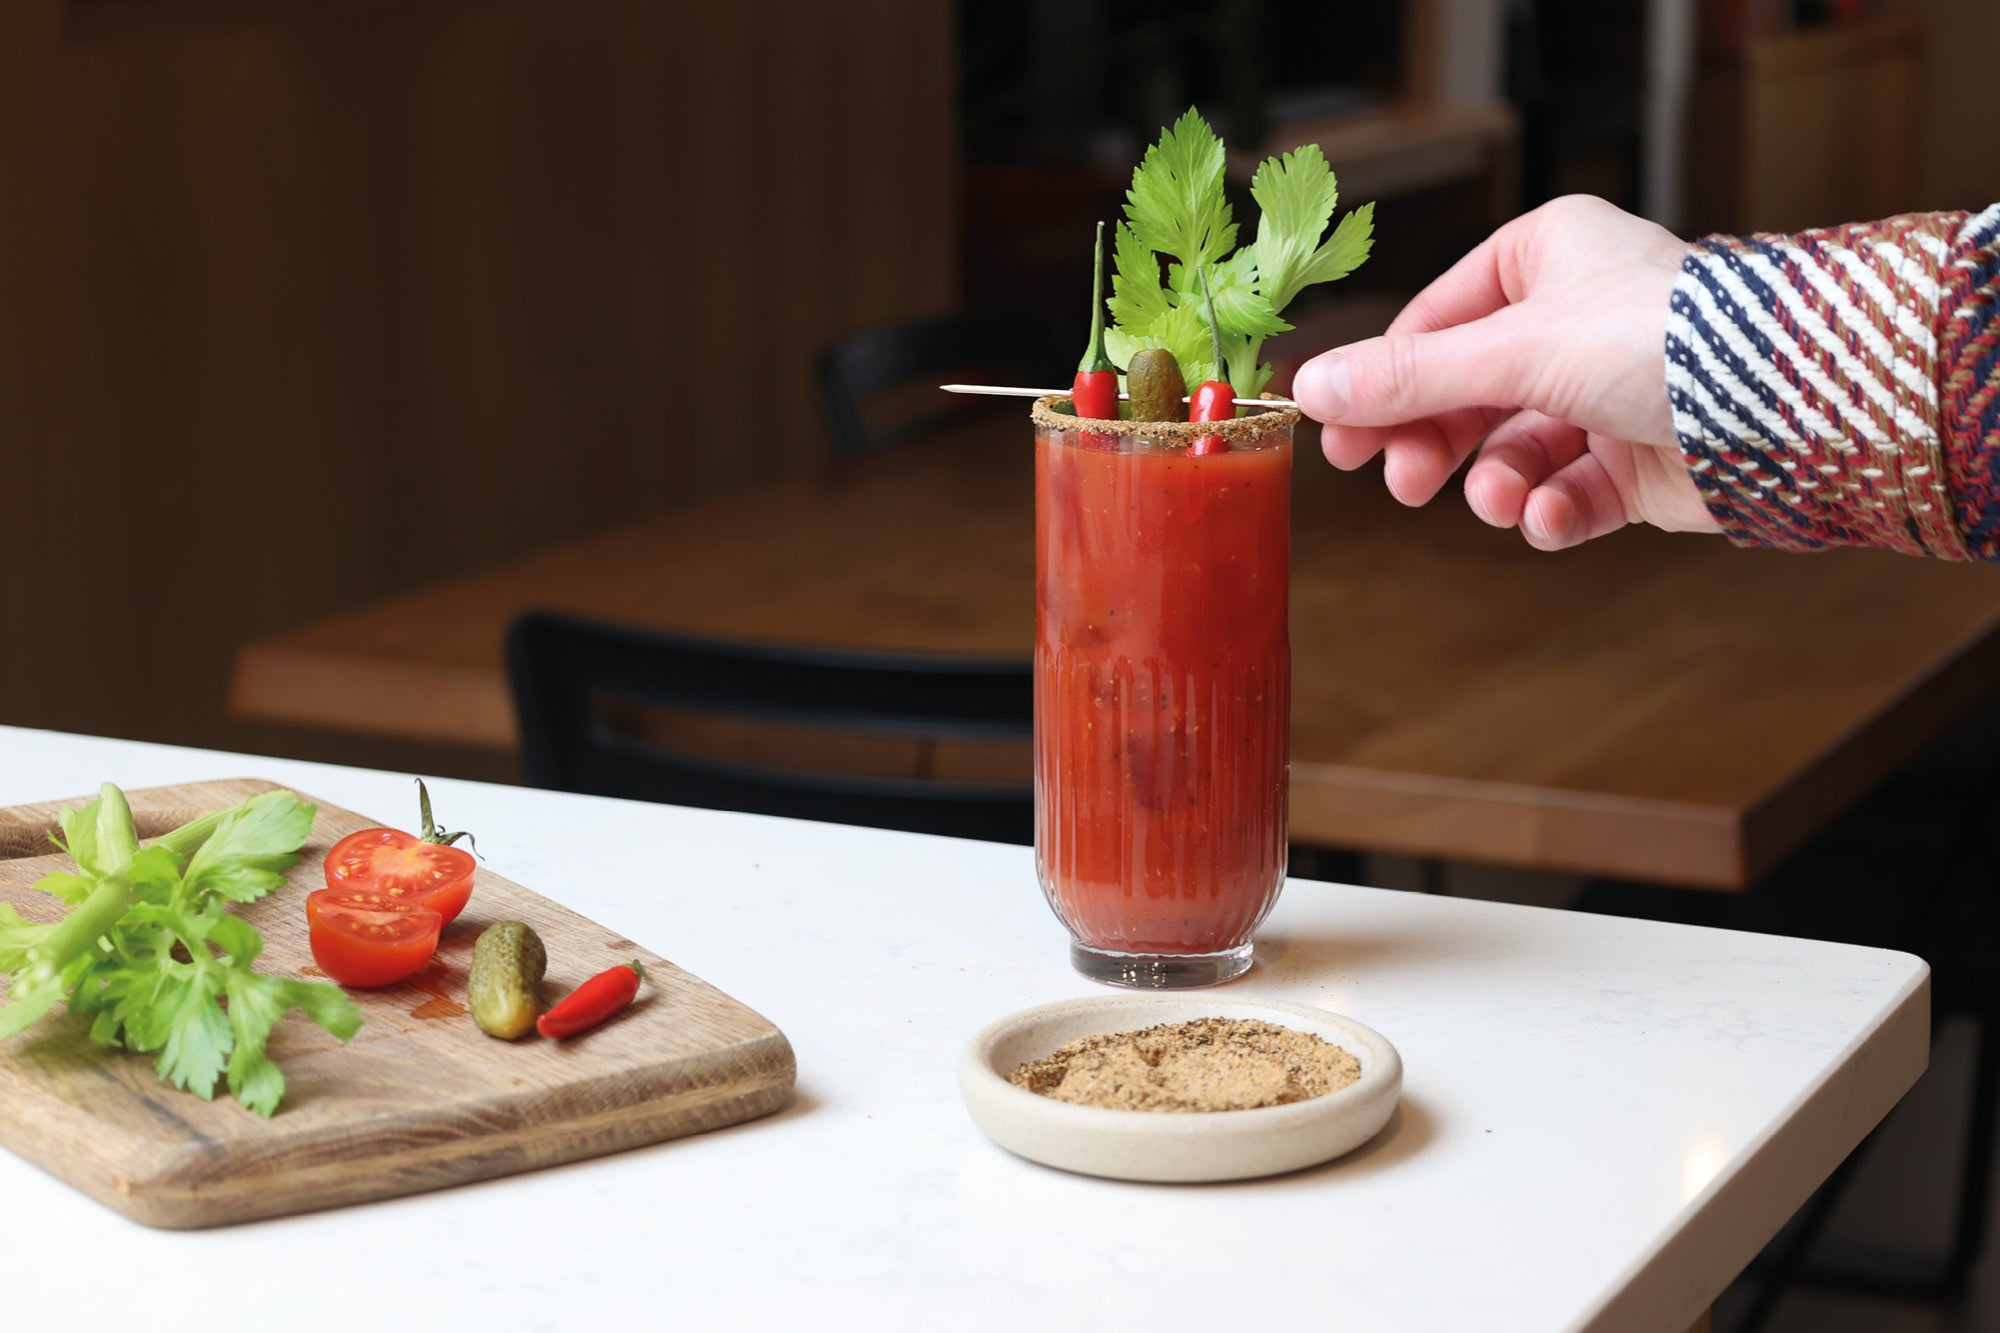 History of Brunch: Bloody Mary Mixology